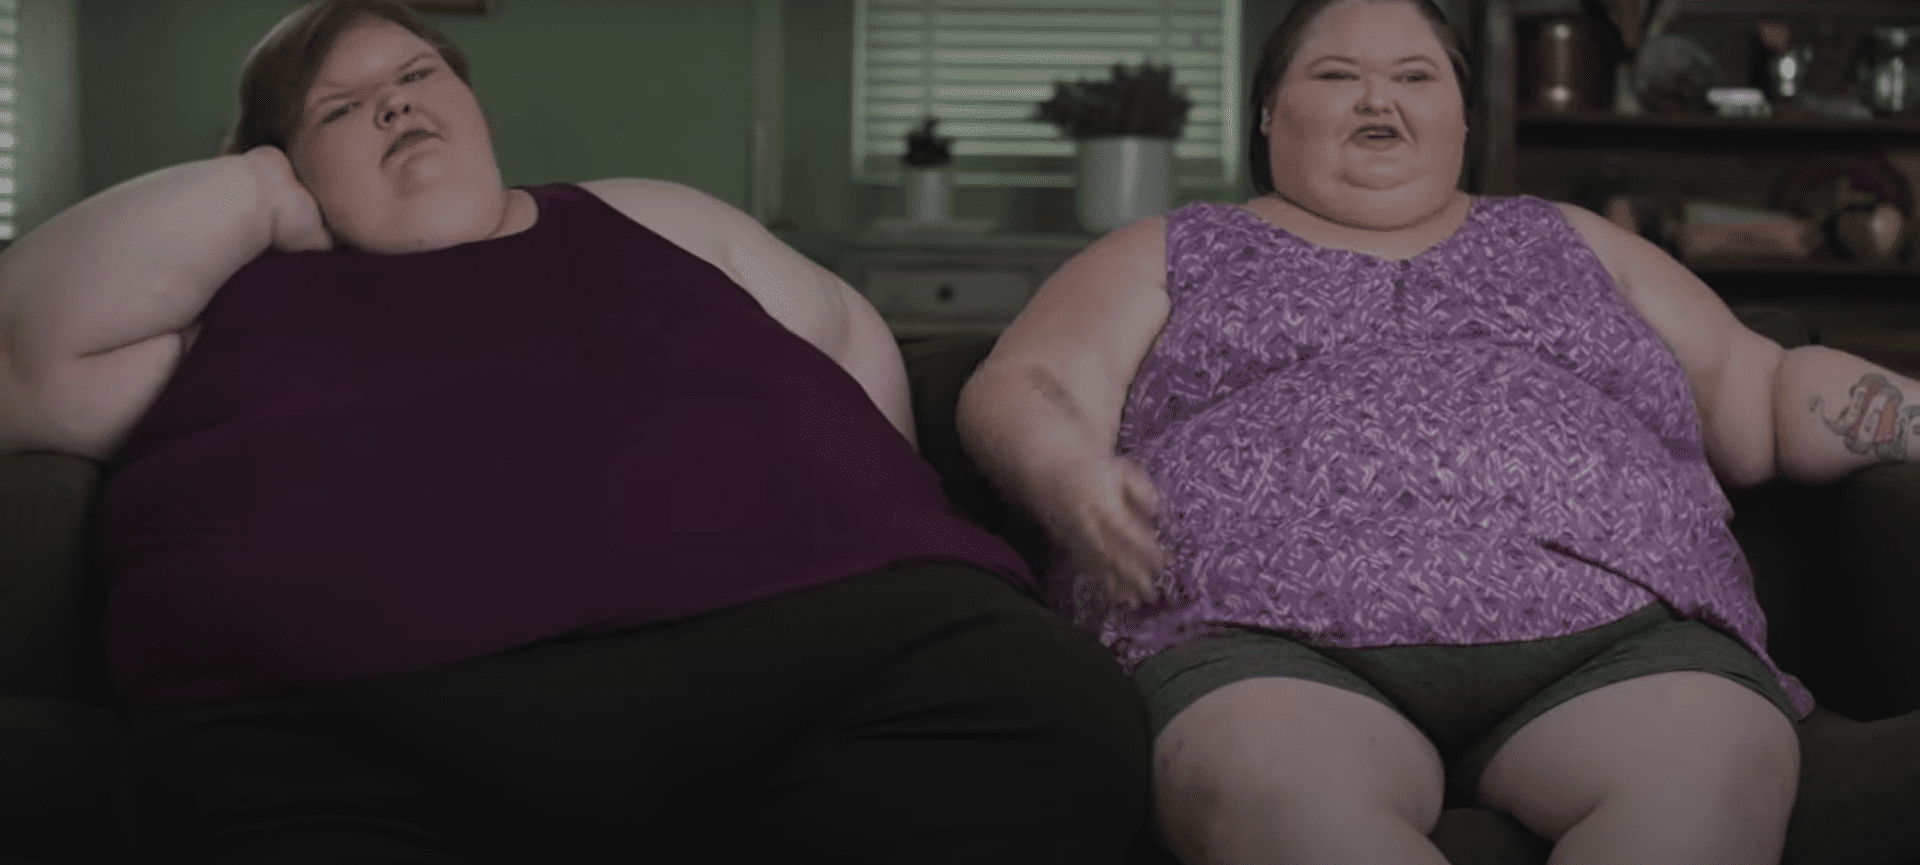 Amy and Tammy Slaton during an episode of their show "1000-LB Sisters." | Photo: YouTube/TLC